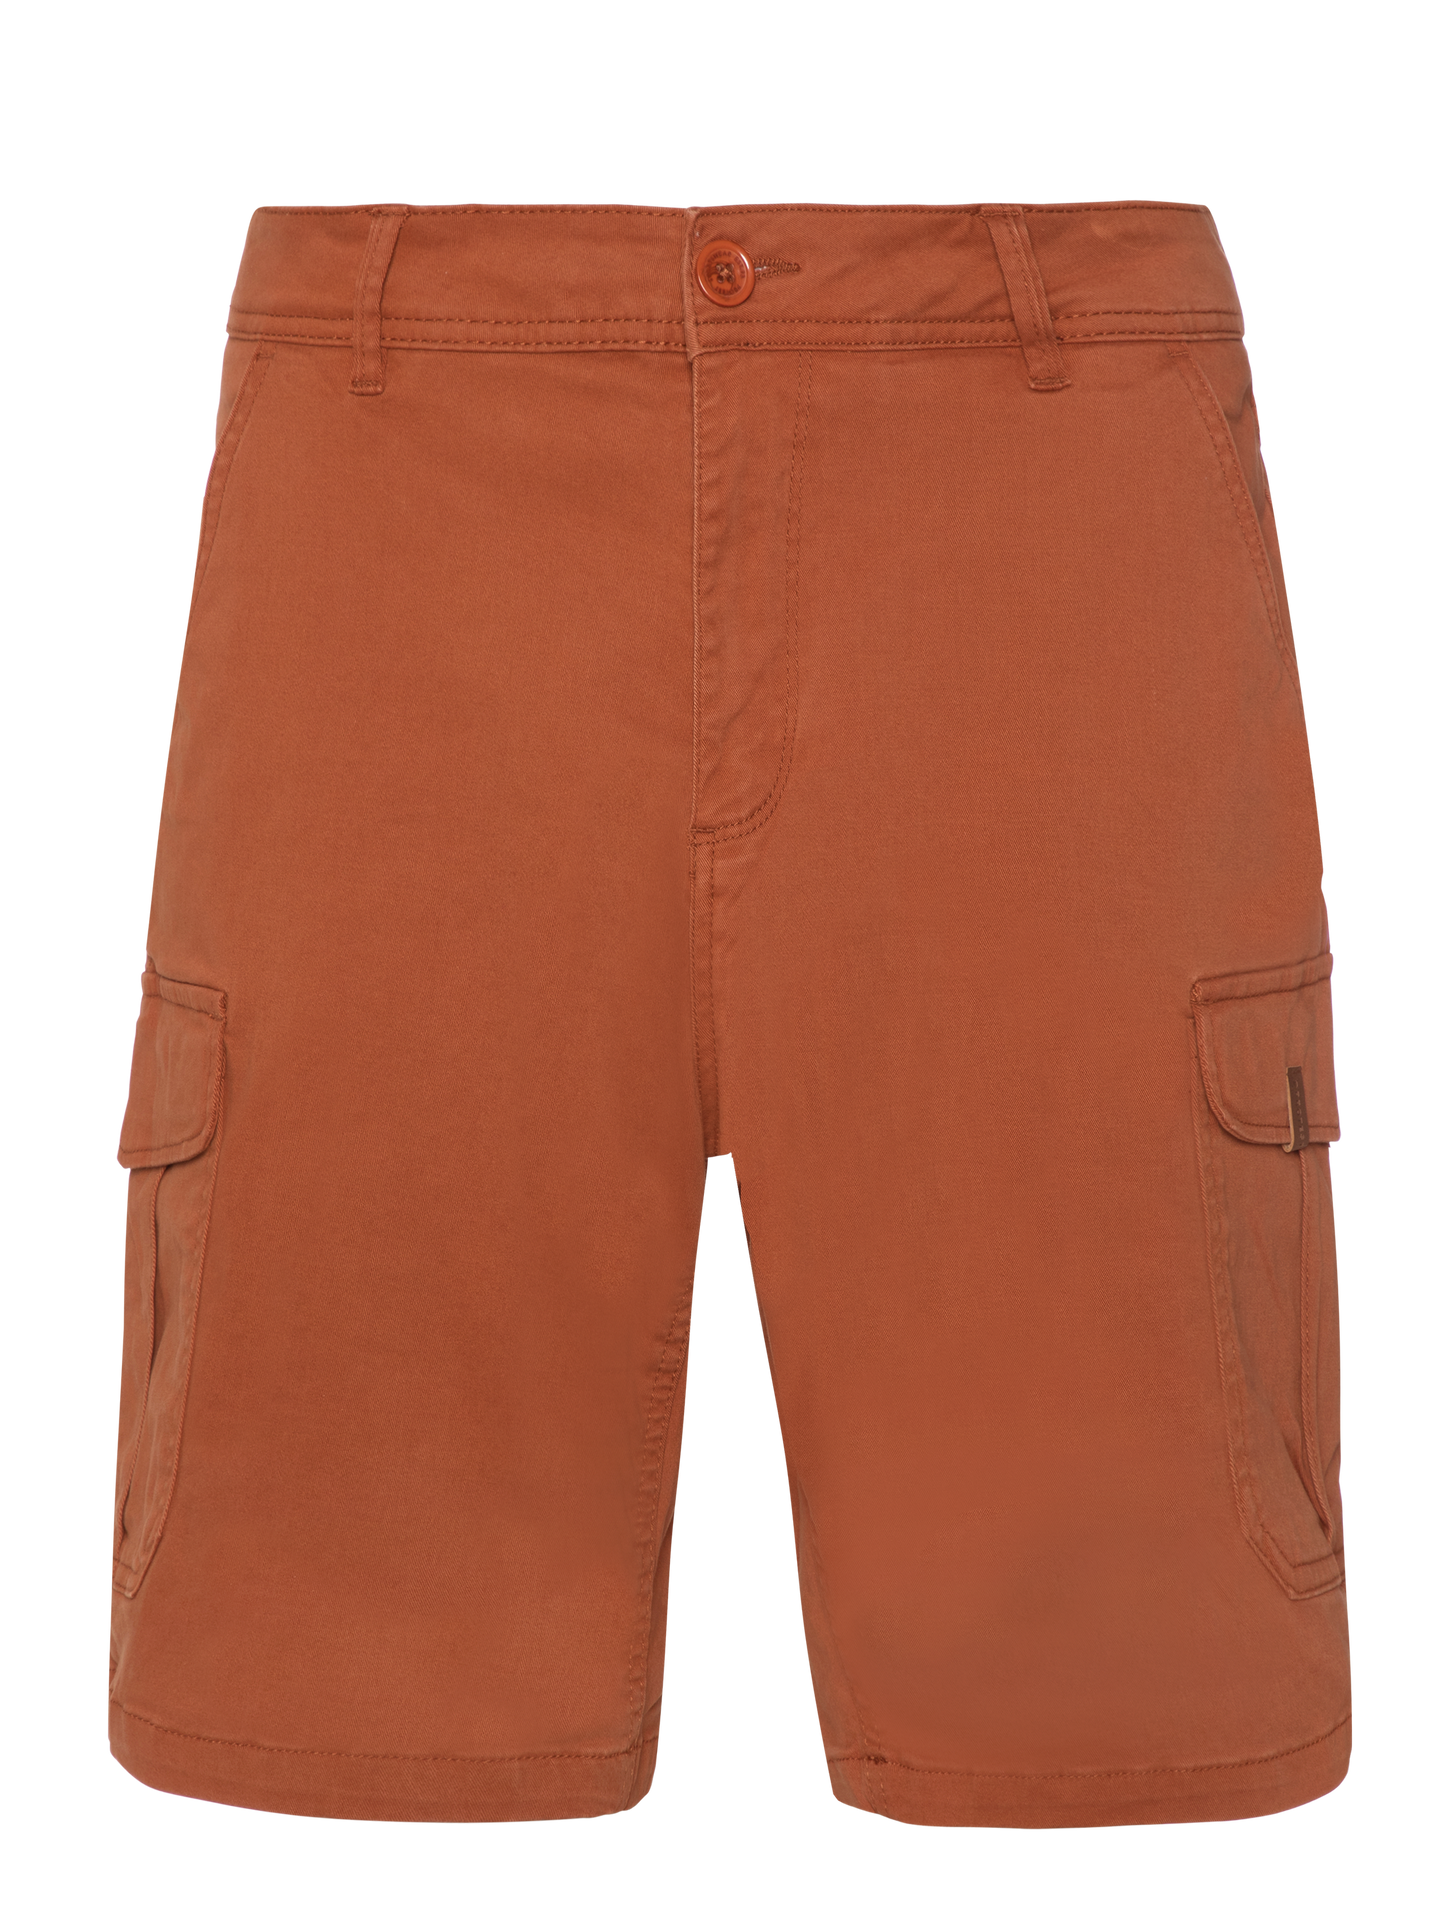 Protest Nytro Walkshorts in Ginger Brown